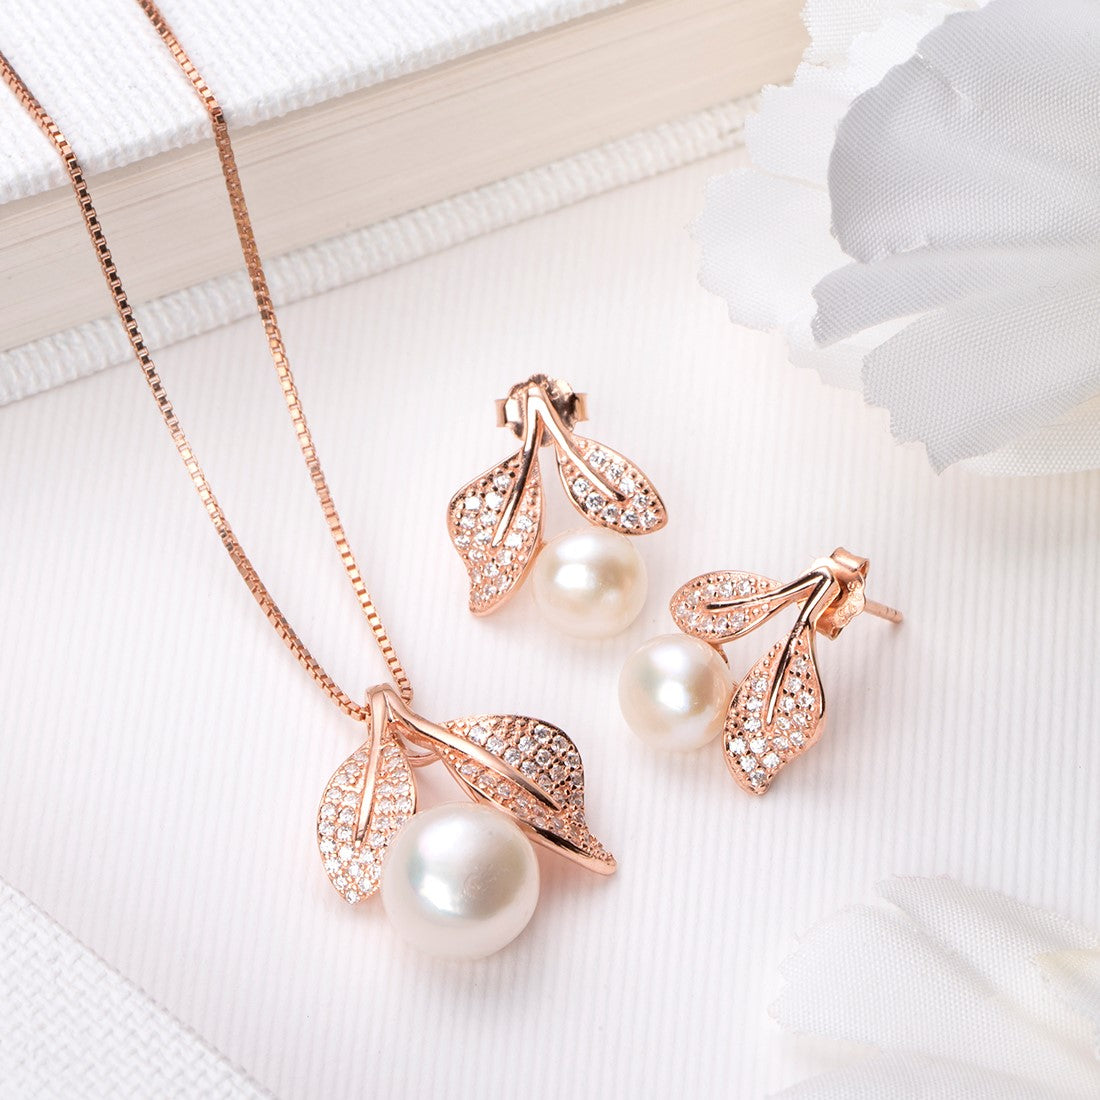 Lustrous Leaves & Pearls Rose Gold-Plated 925 Sterling Silver Jewelry Set